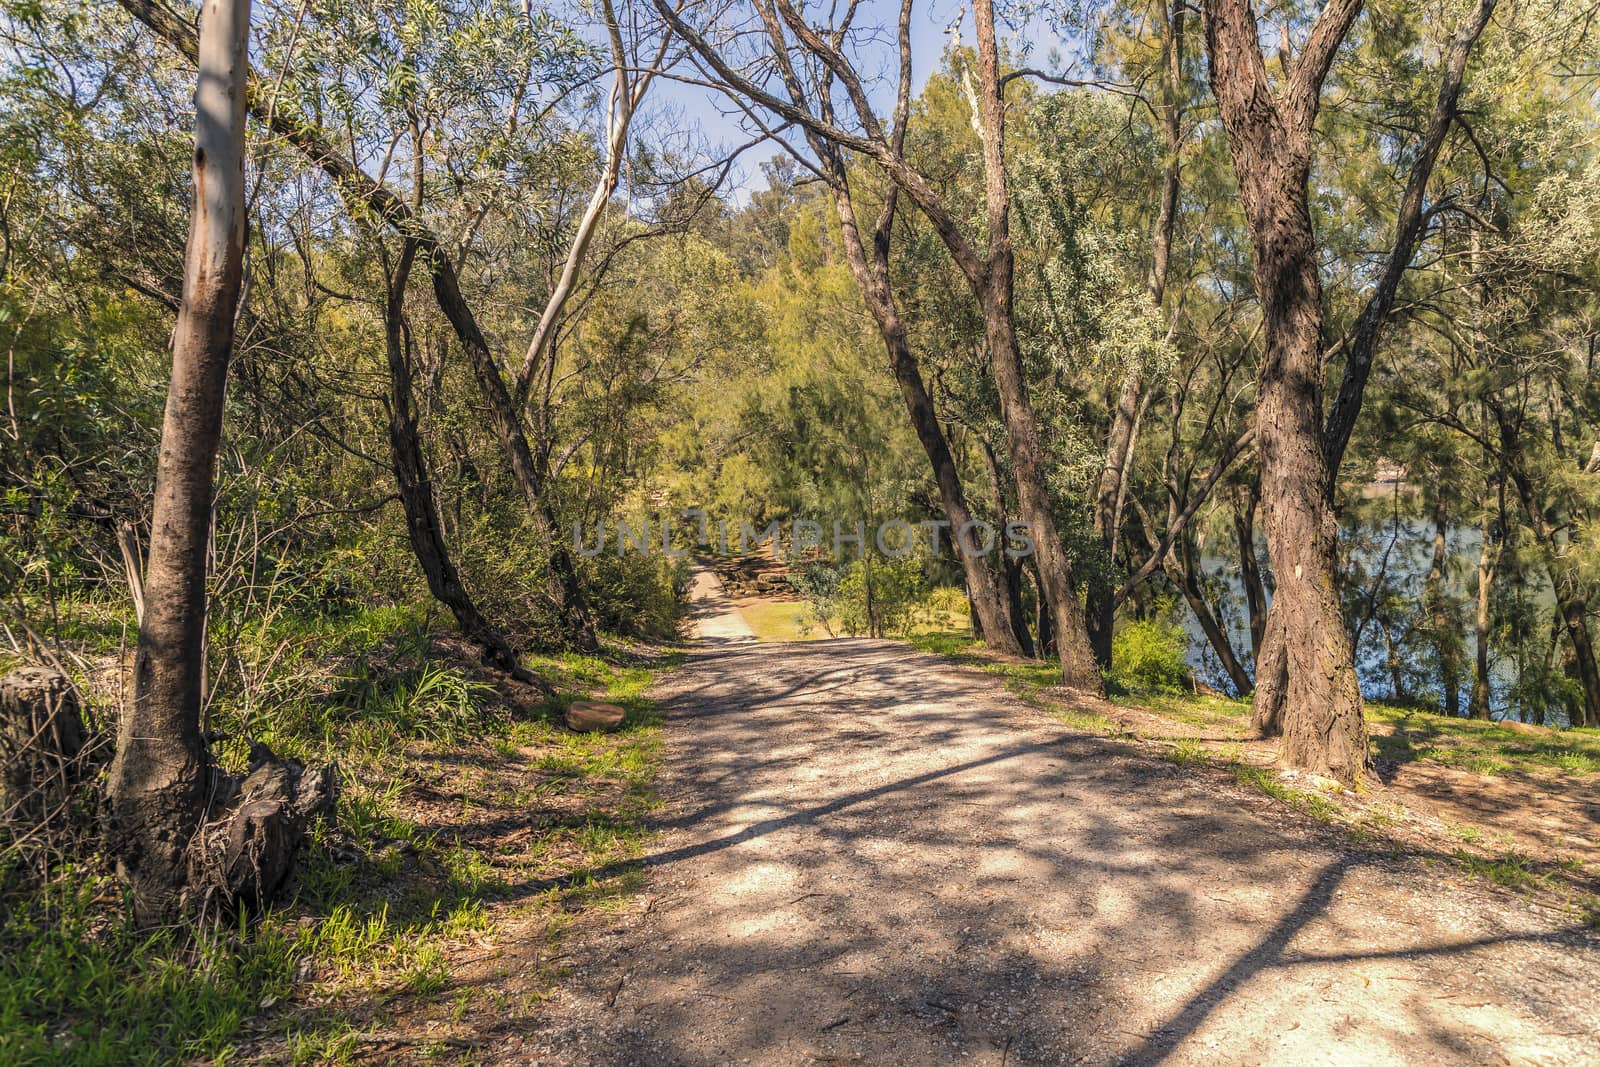 A dirt road in a forest in the outback in regional Australia